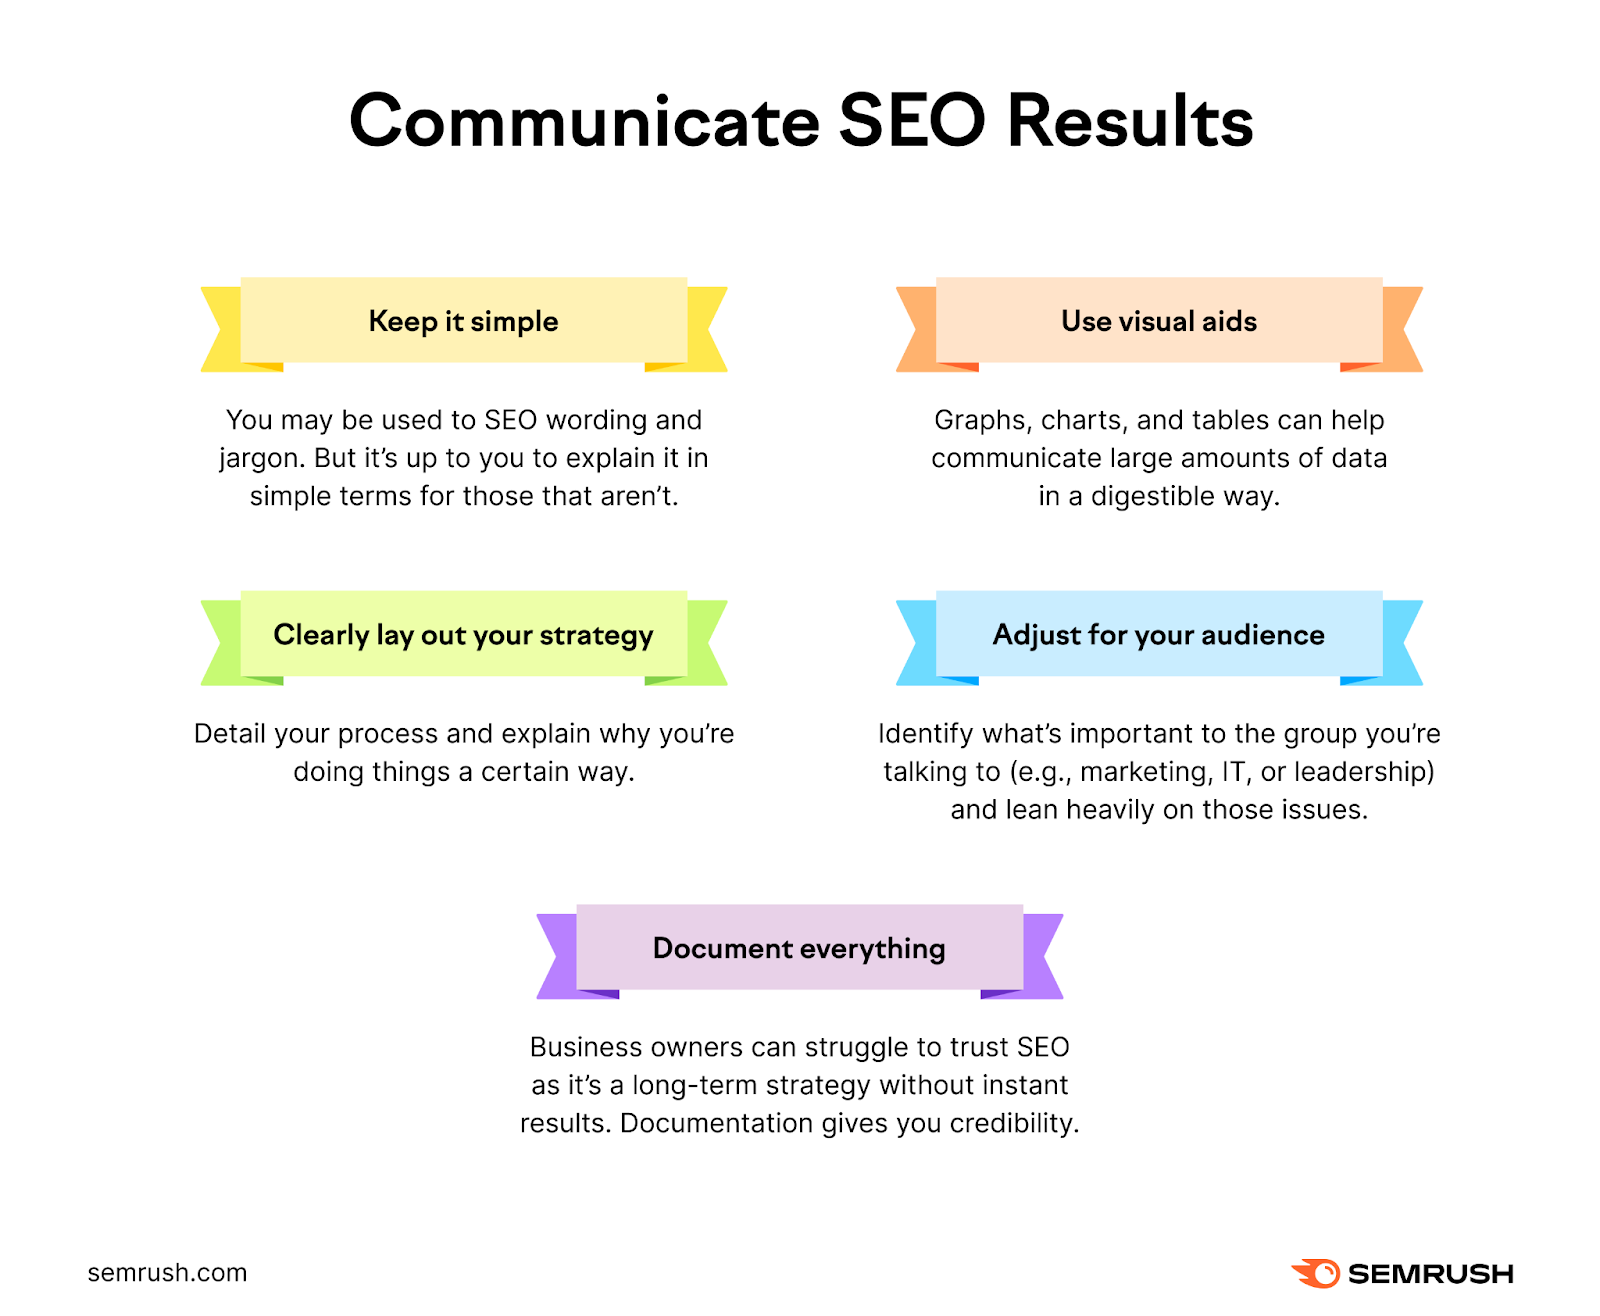 "Communicate SEO Results" tips